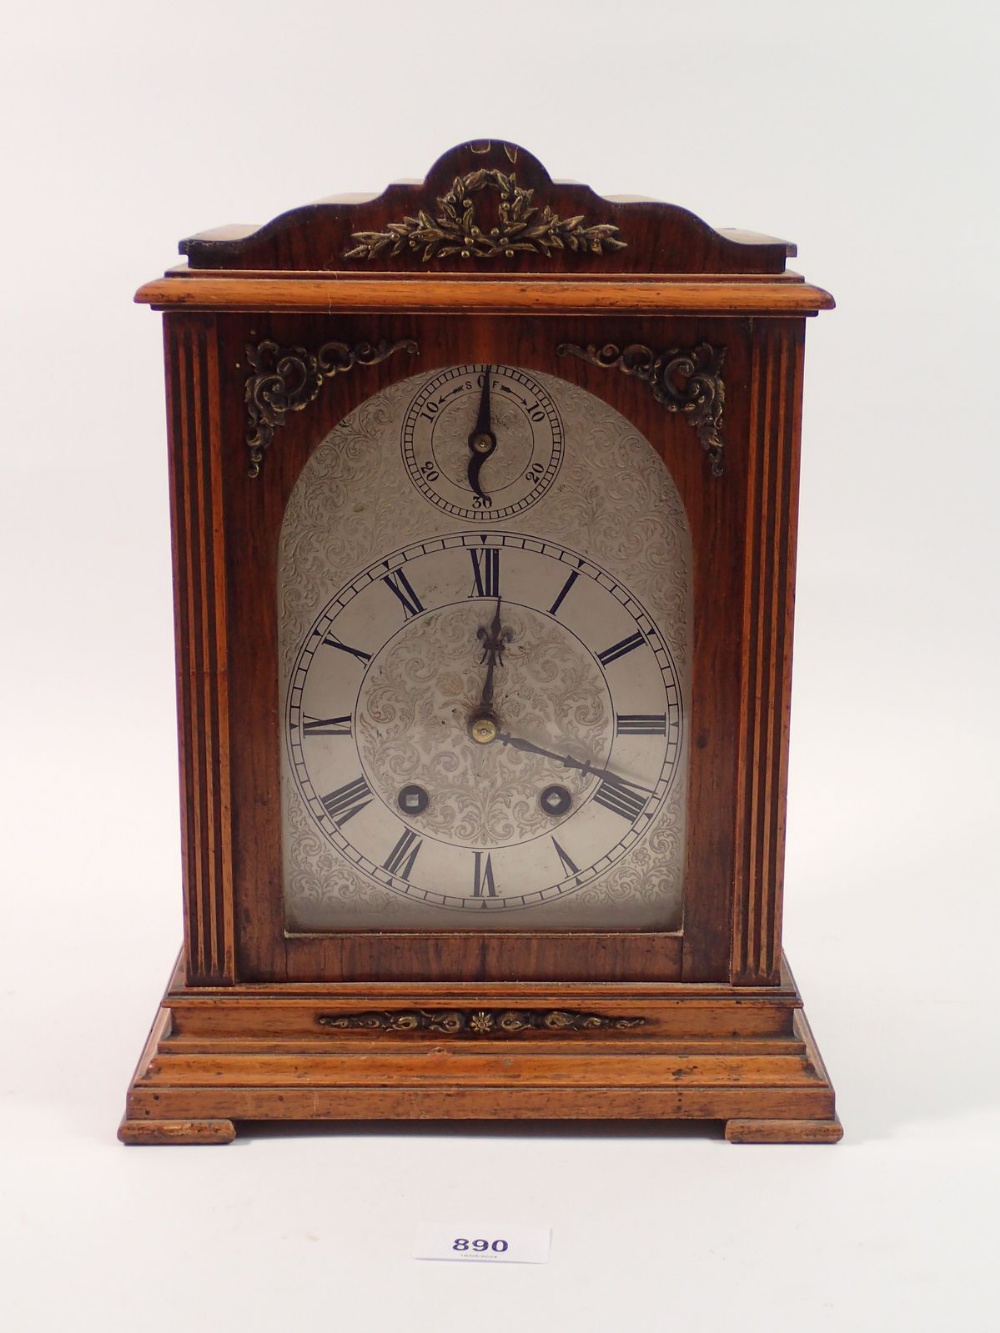 A late 19th century oak mantel clock with German movement marked Lenzkirch, the silvered face with